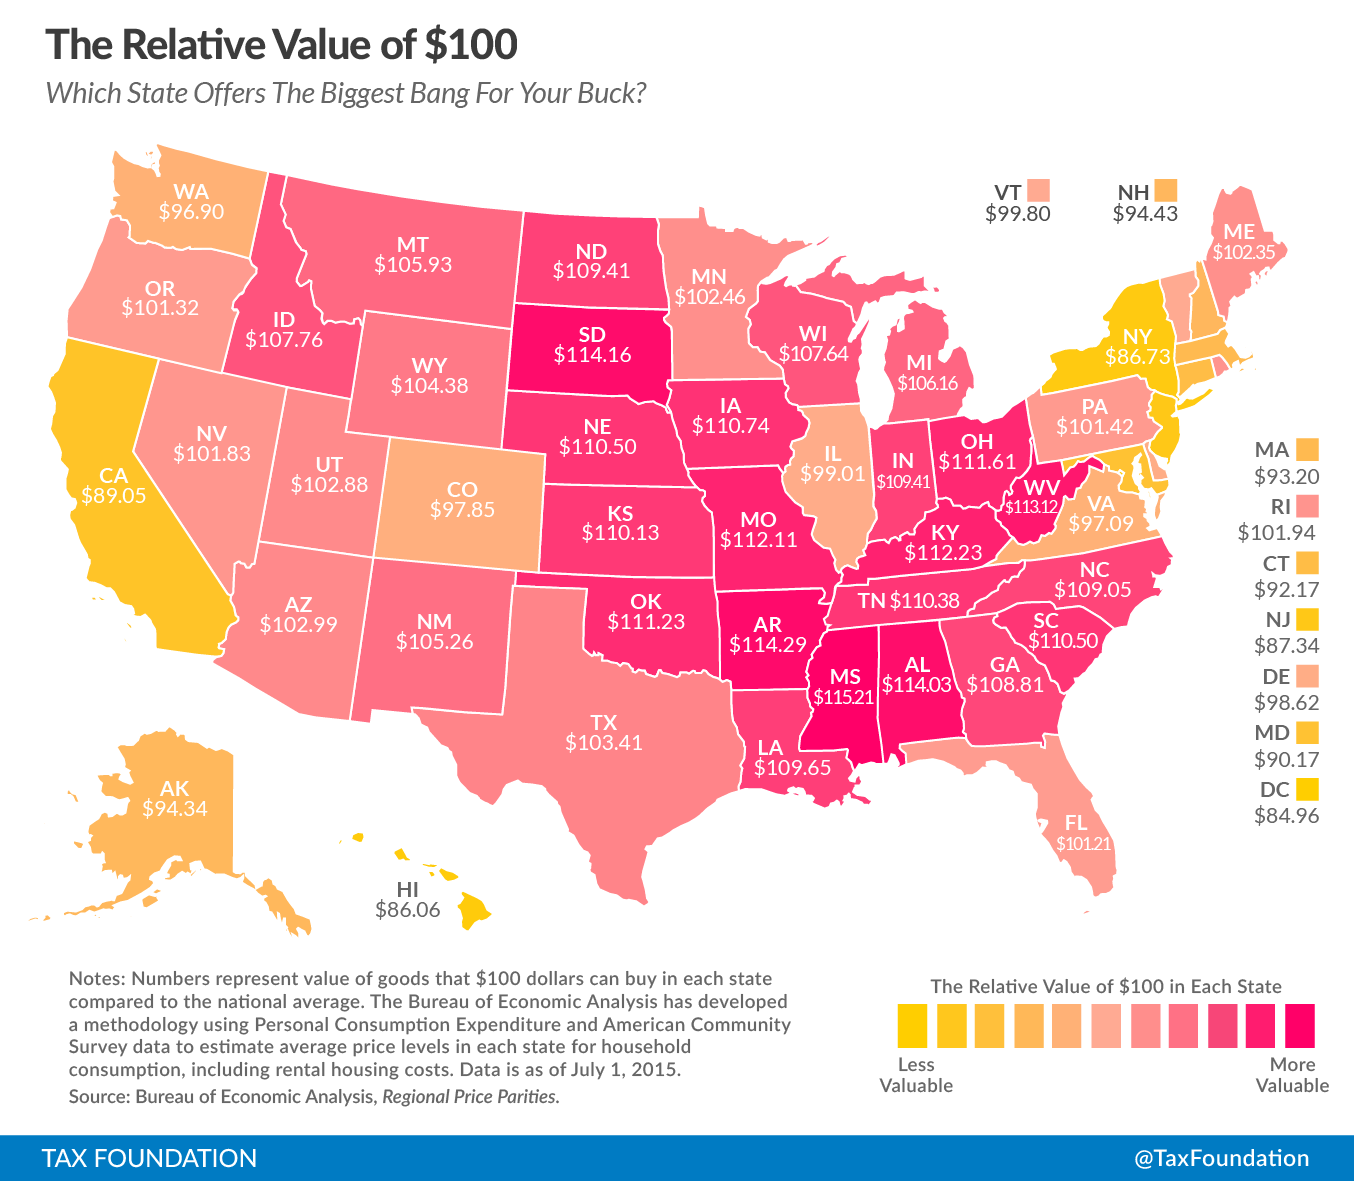 The Real Value of $100 in Each State